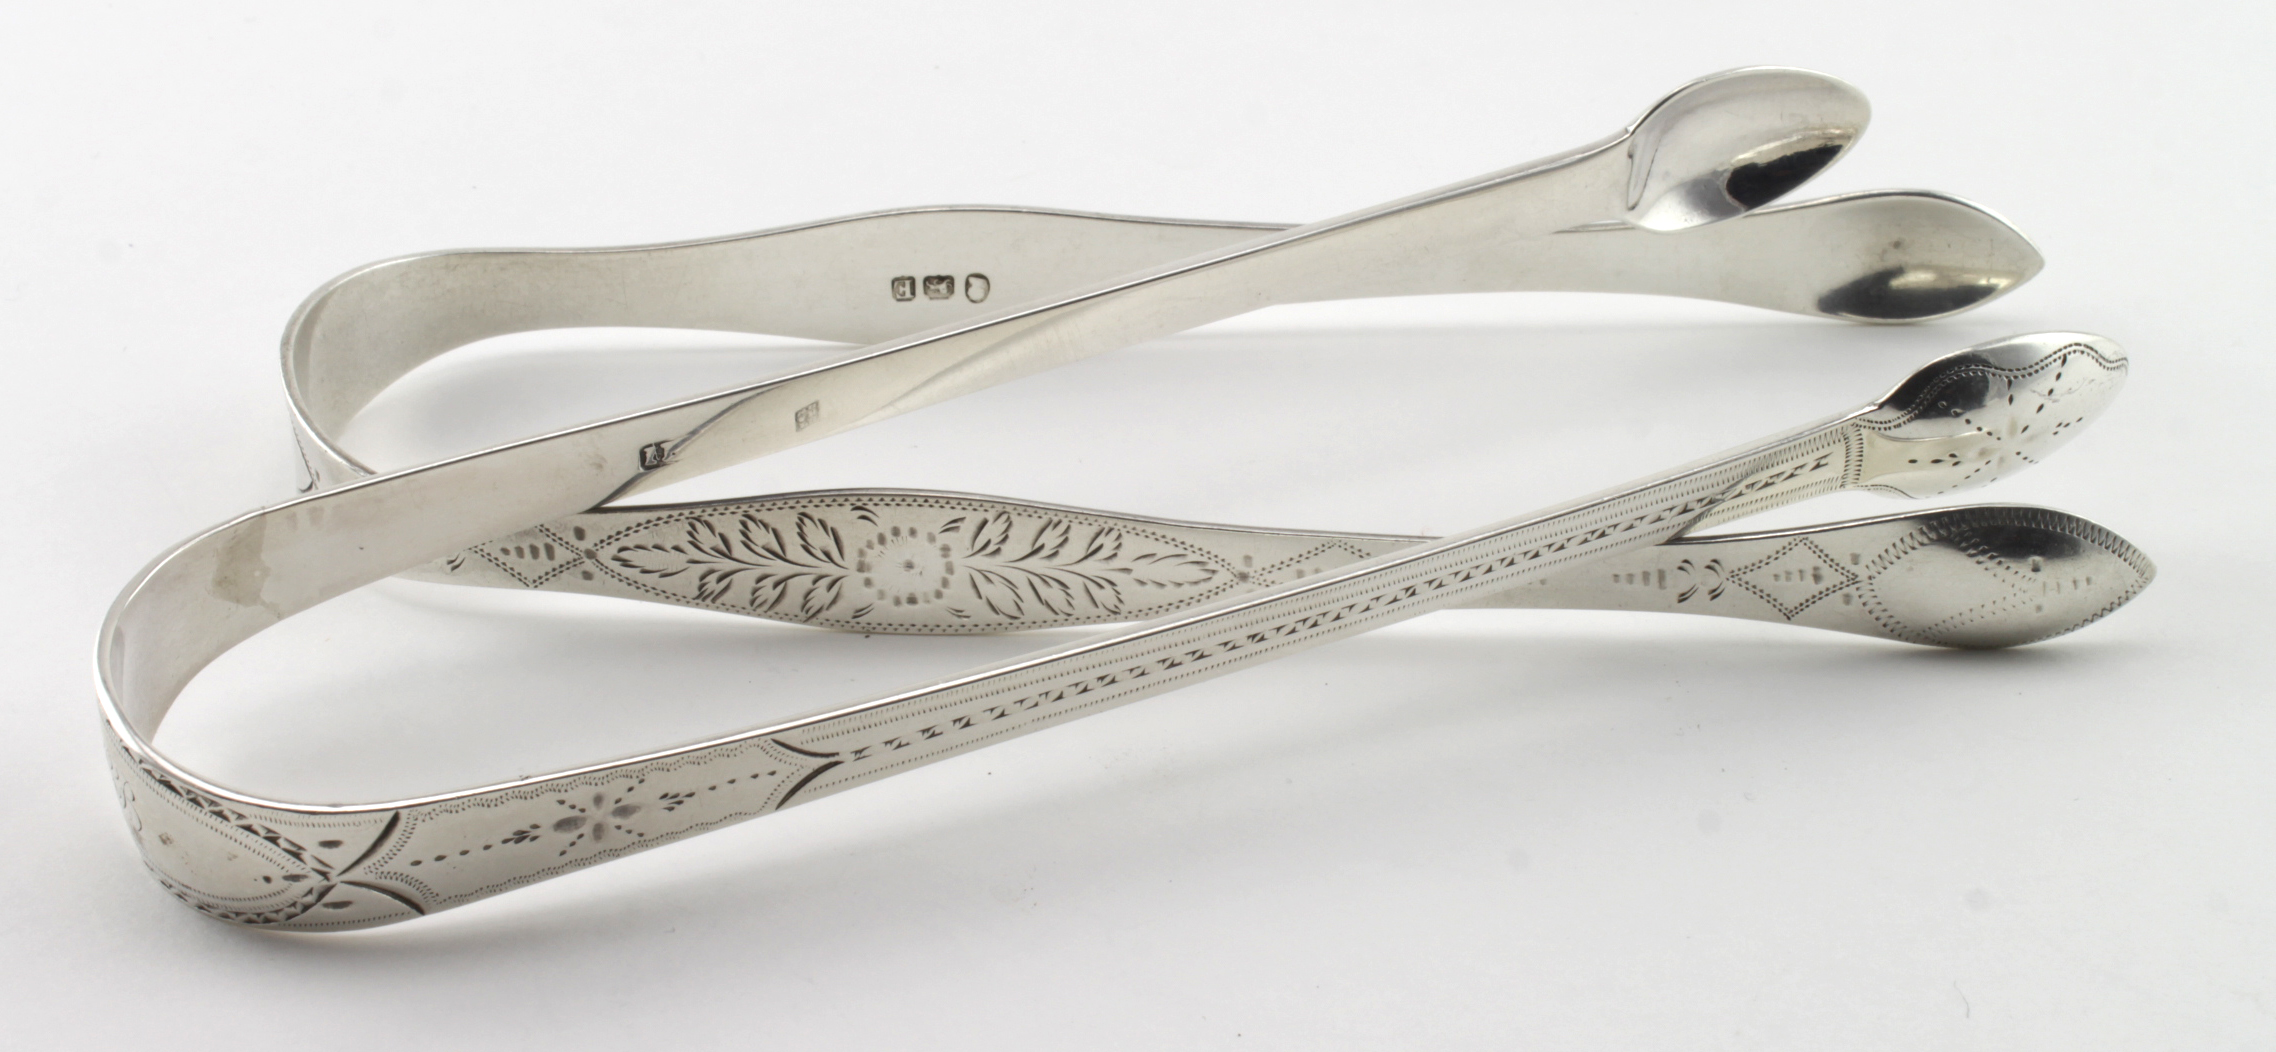 Two pairs of silver, bright-cut Georgian sugar tongs - one is hallmarked Peter, Ann & William